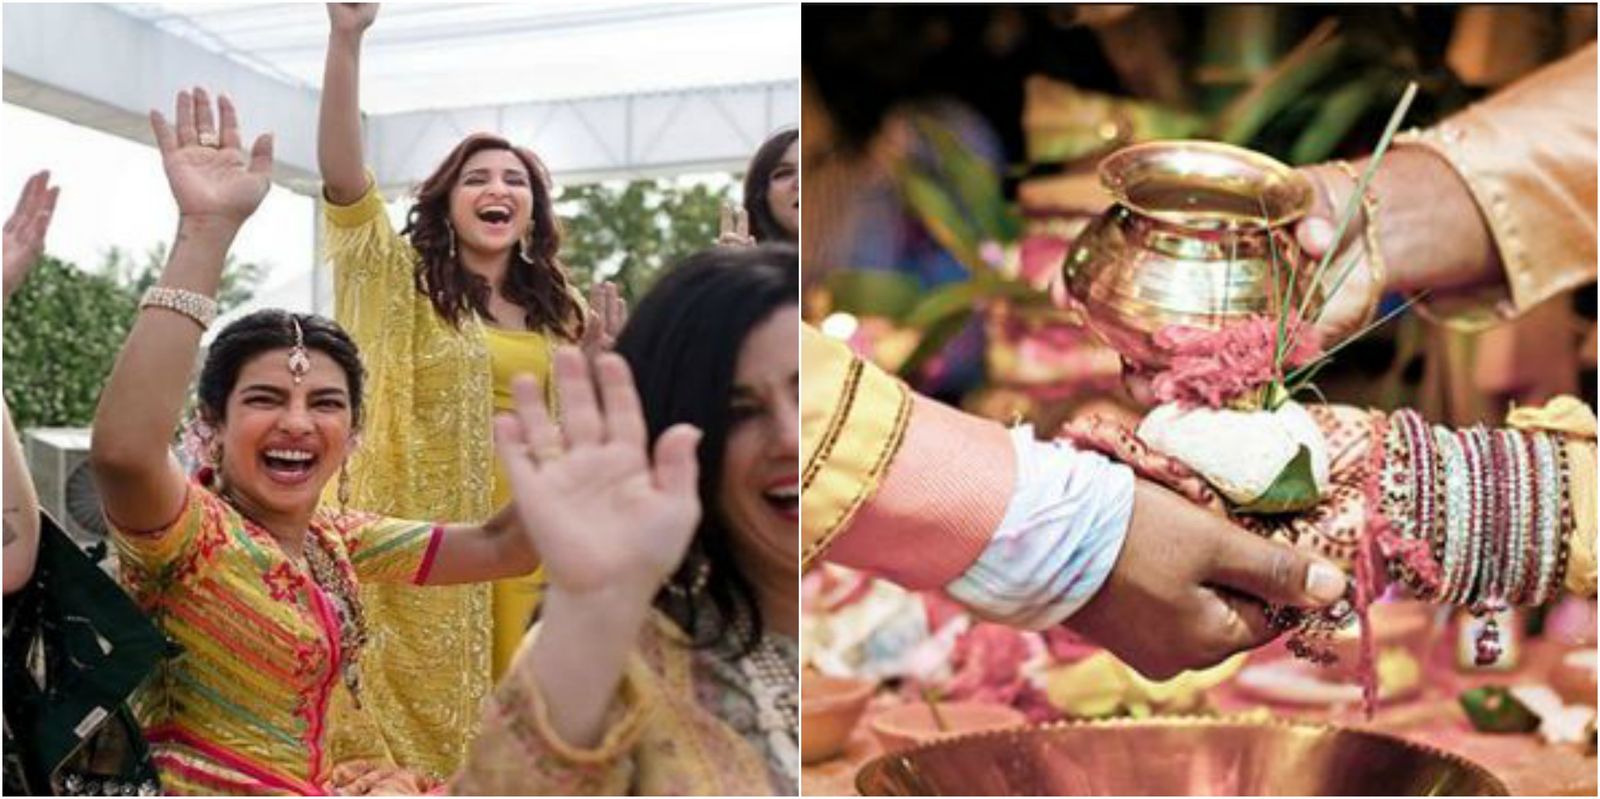 Do You Know Who Is Performing The Kanyadaan Ceremony For Priyanka Chopra?